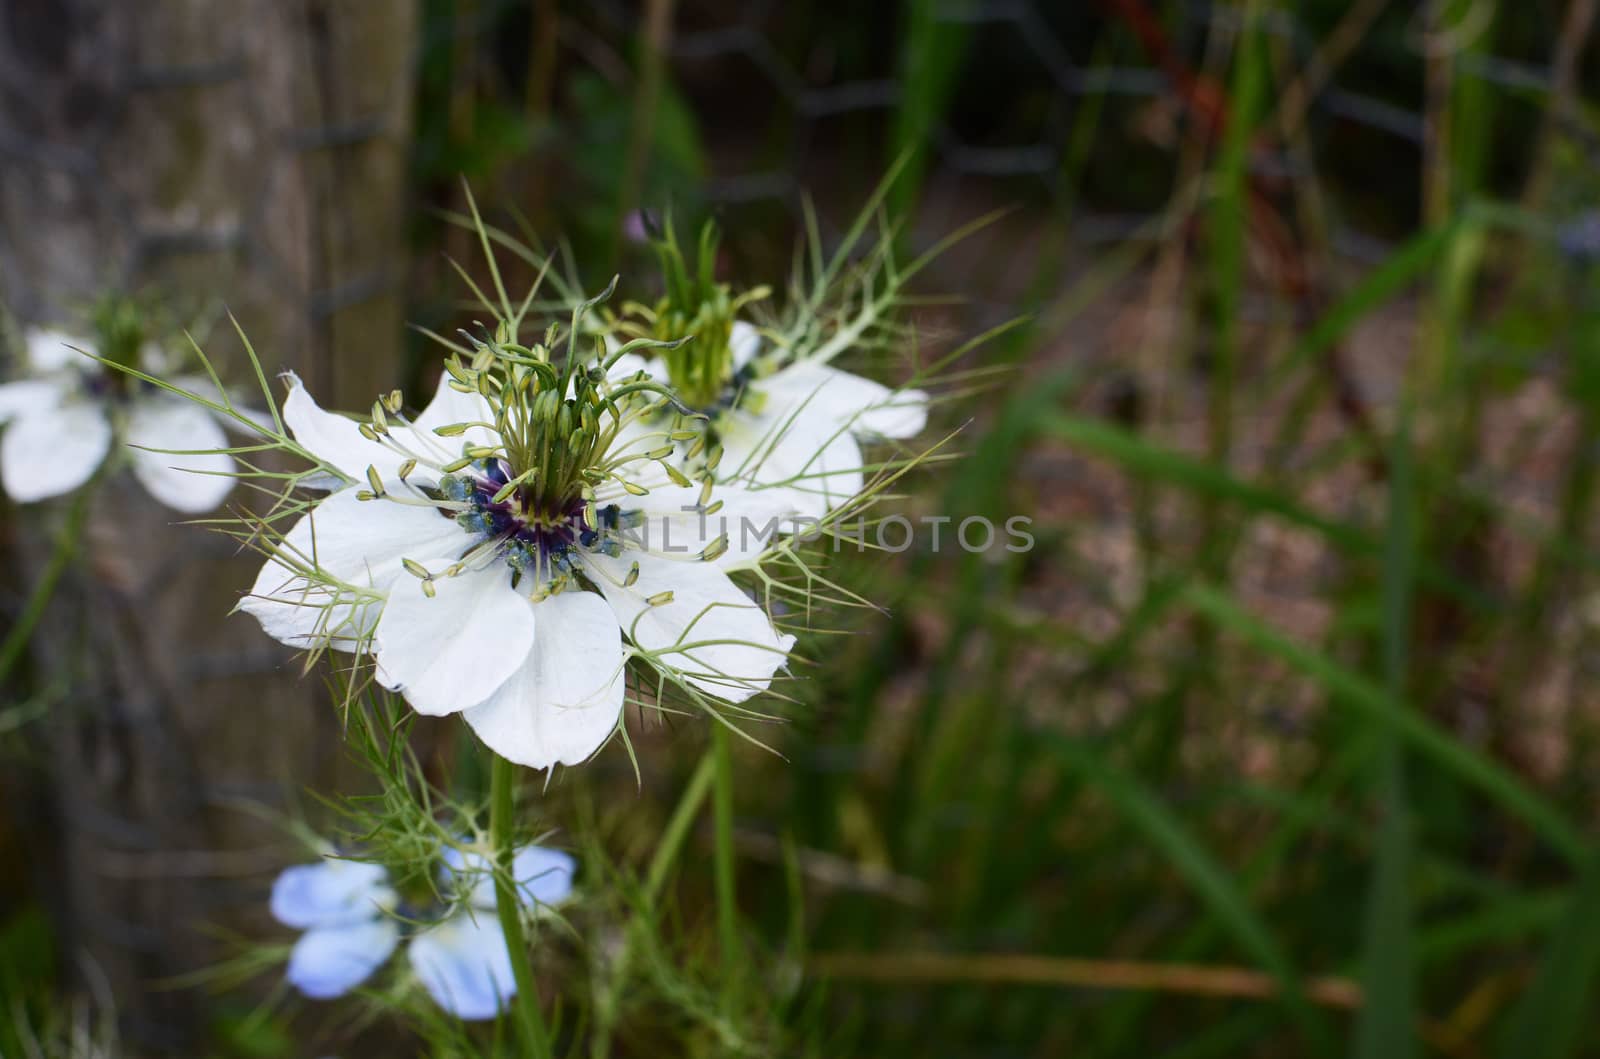 Delicate white nigella flower, common name Love in a Mist, growing in a rural garden